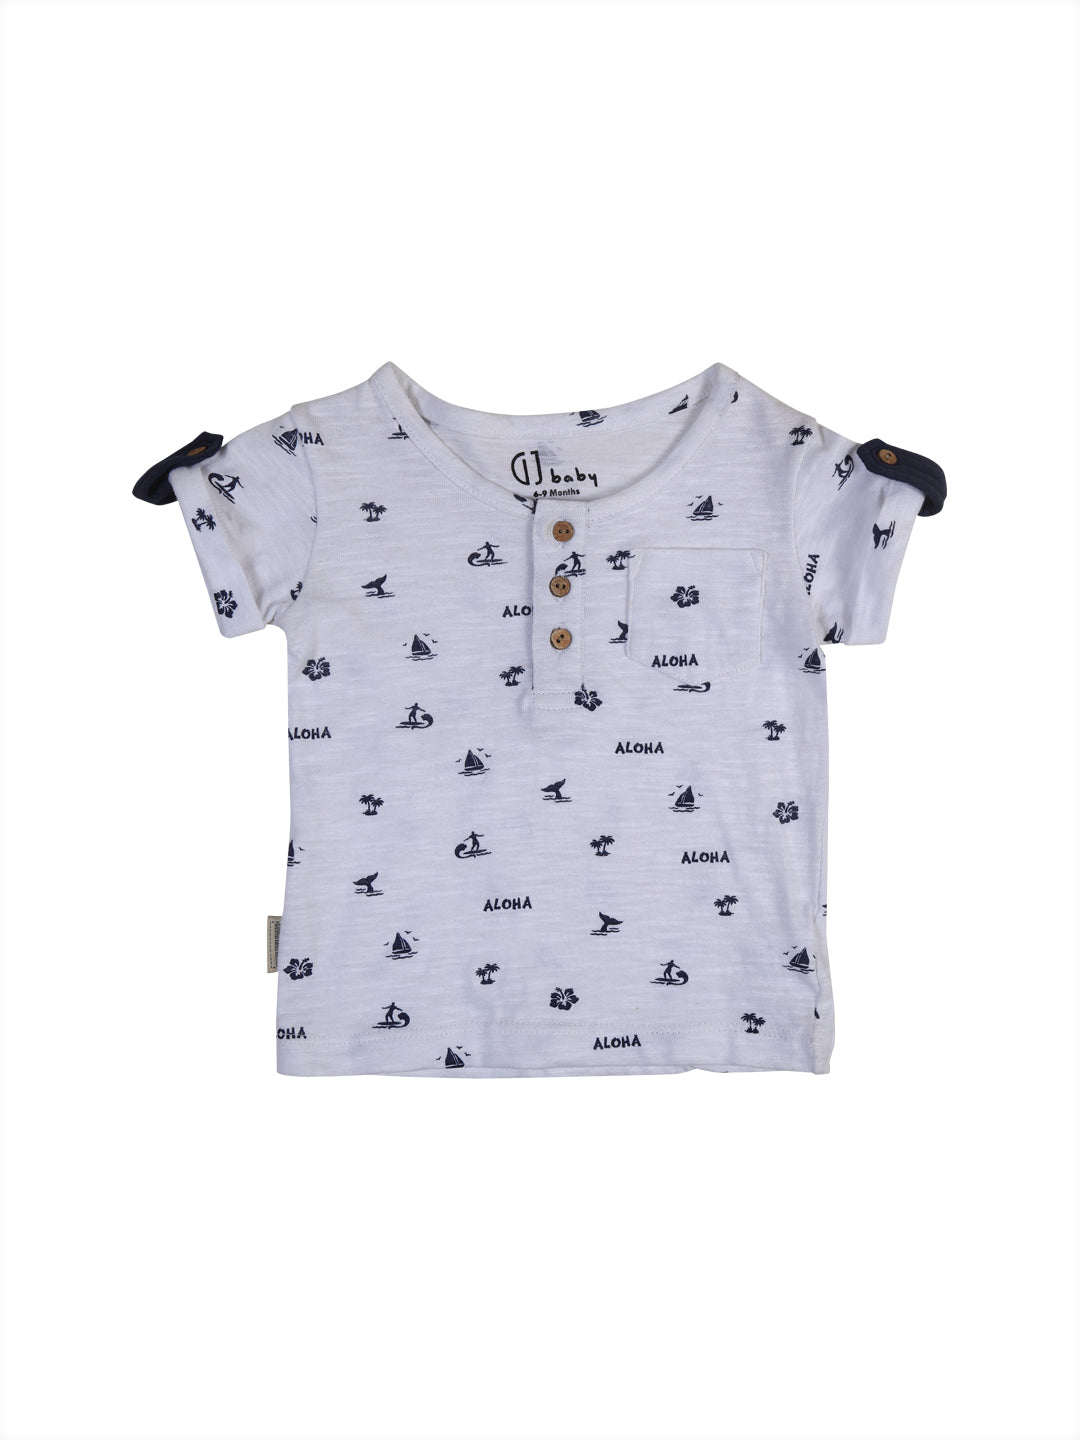 Baby Boys Navy Blue Printed Knits Co-Ordinate 2 Piece